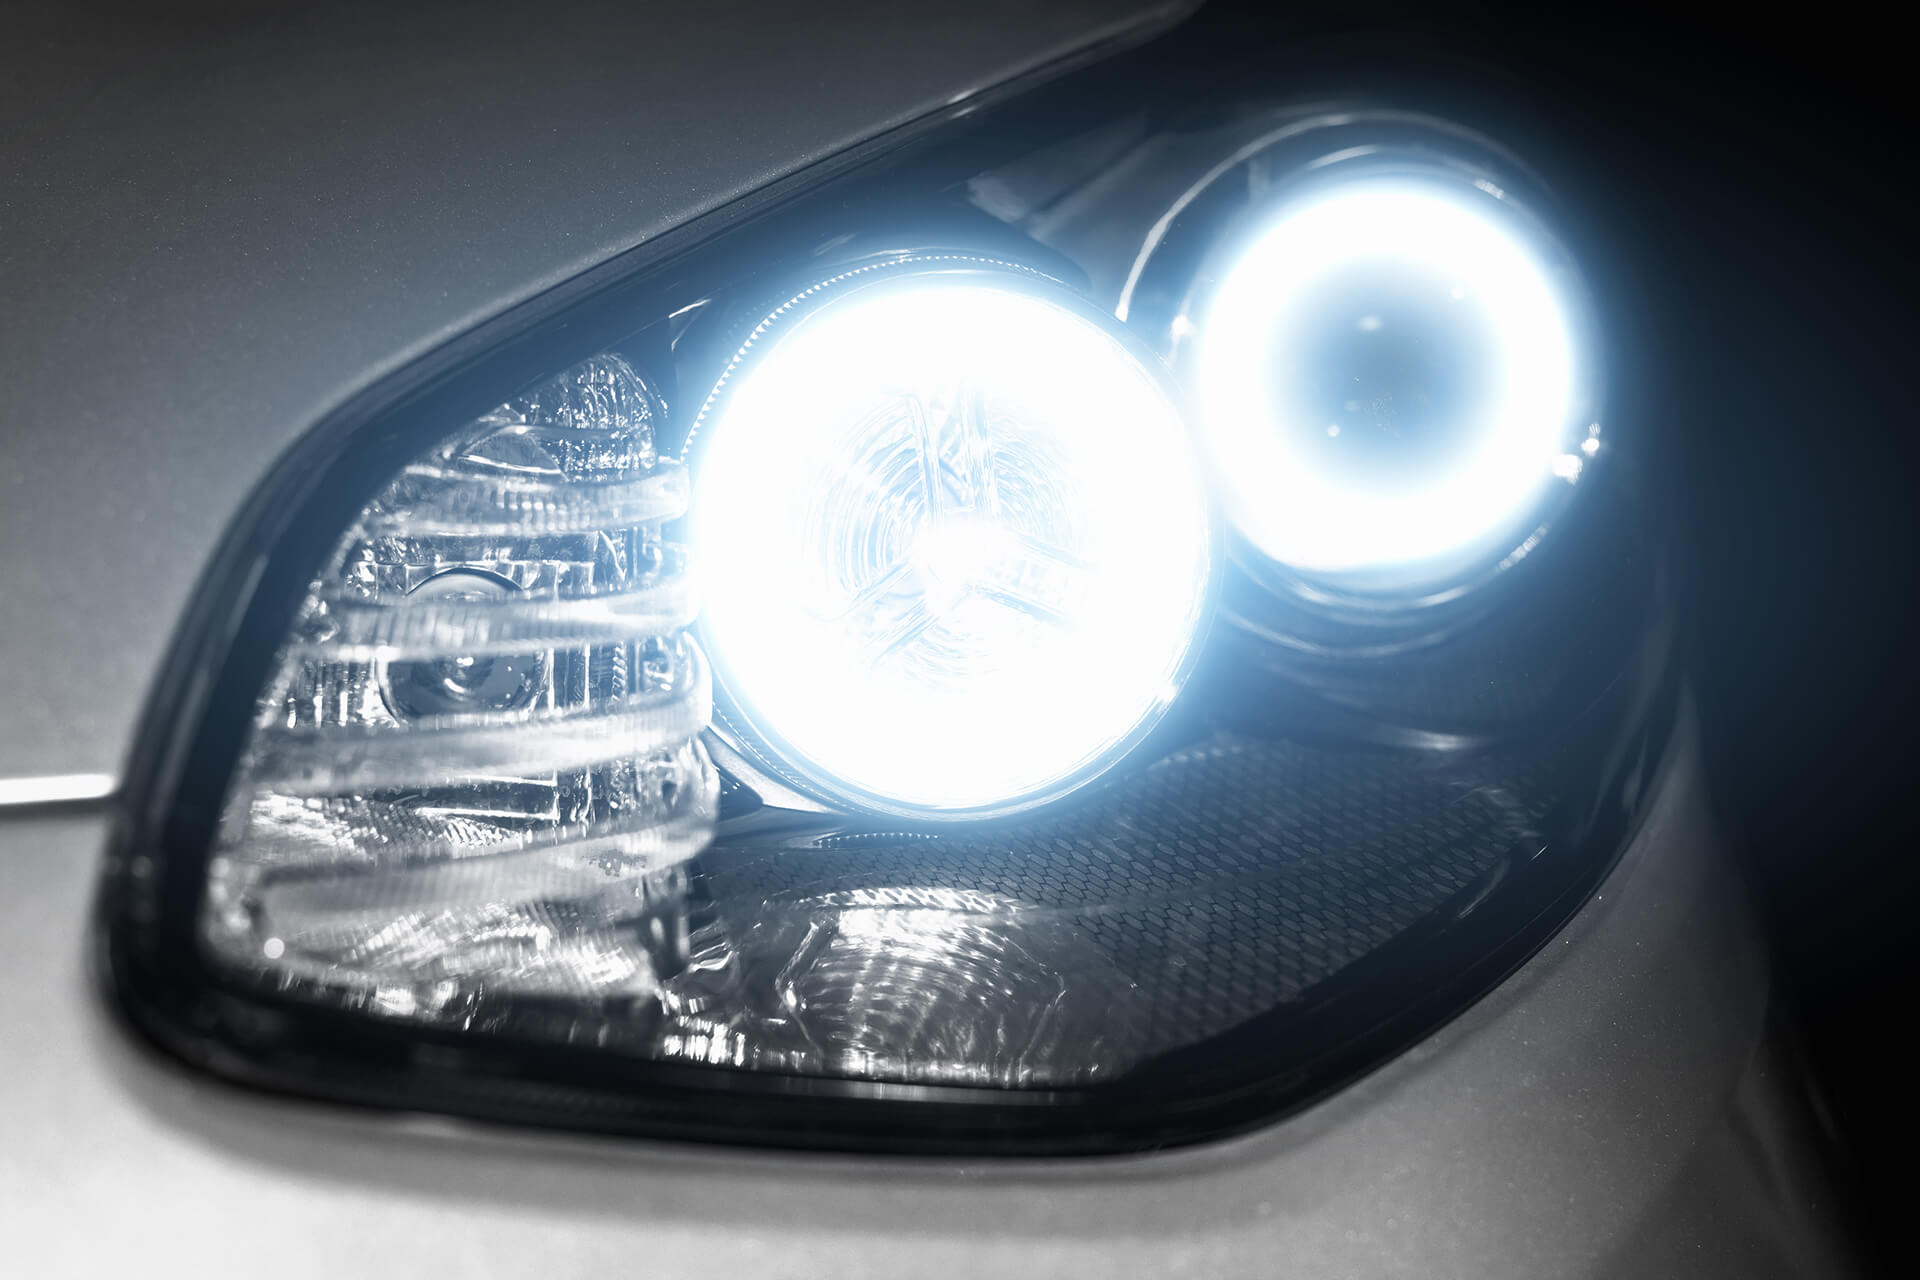 LED Licht im Auto - Made in Germany